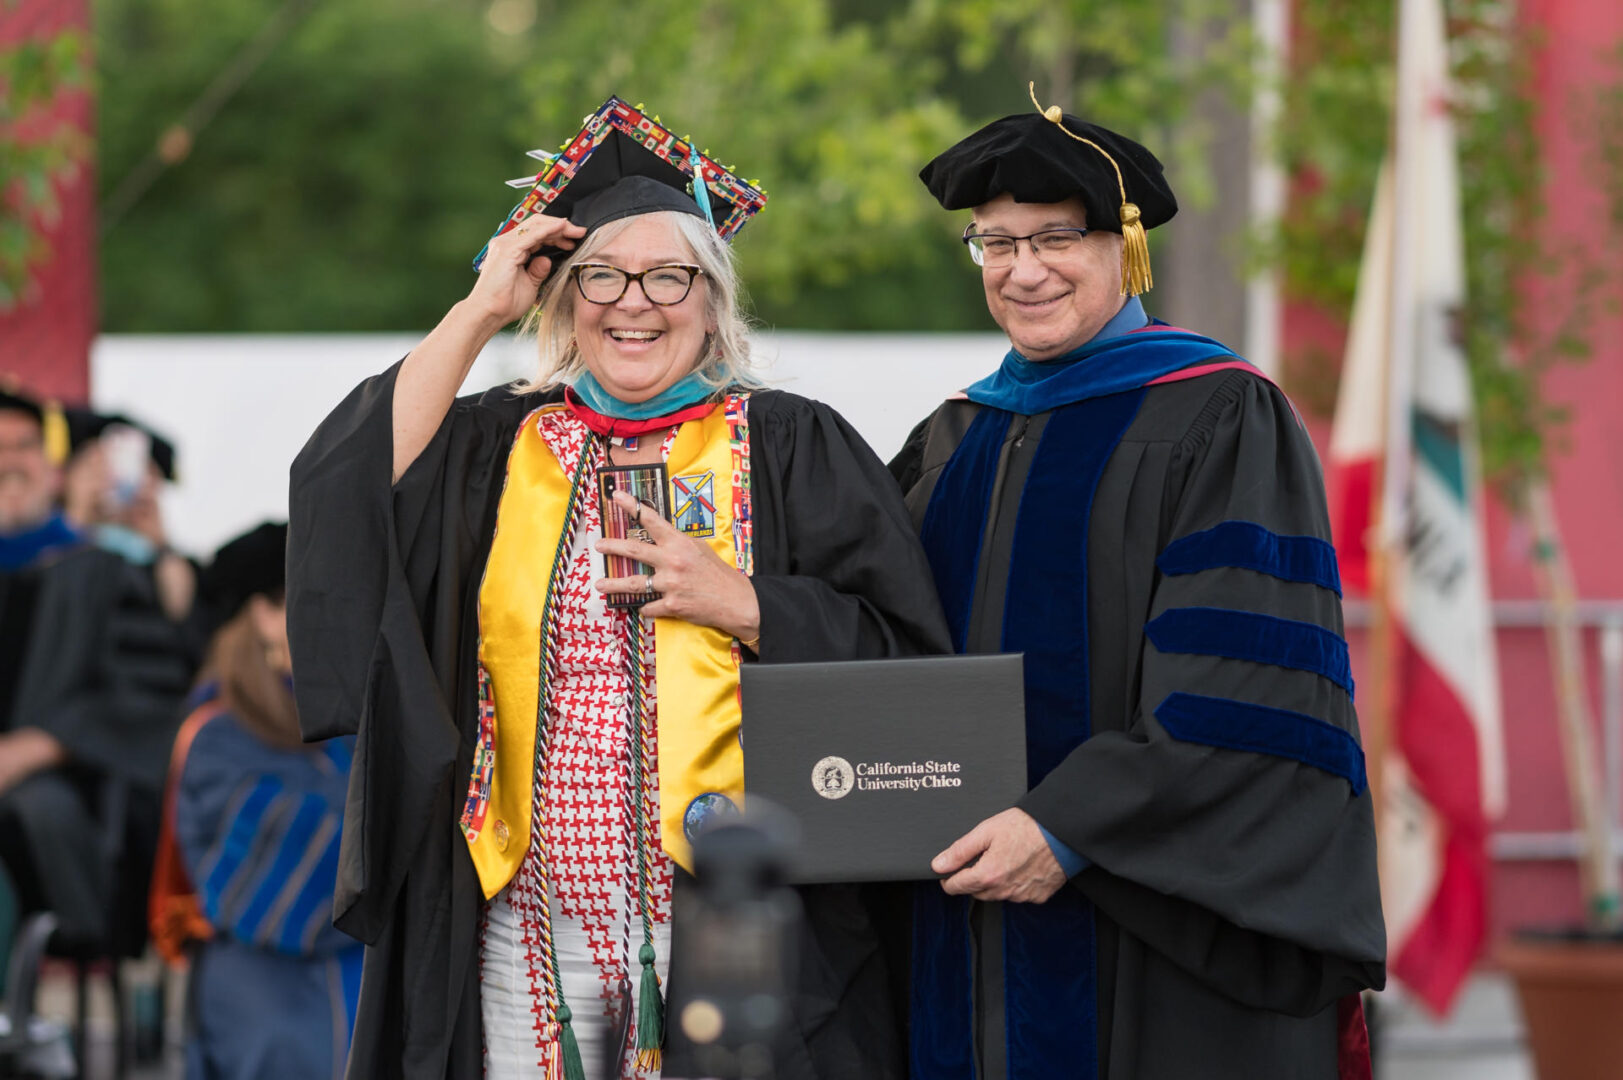 A graduating college student smiles and stands next to a dean of the college